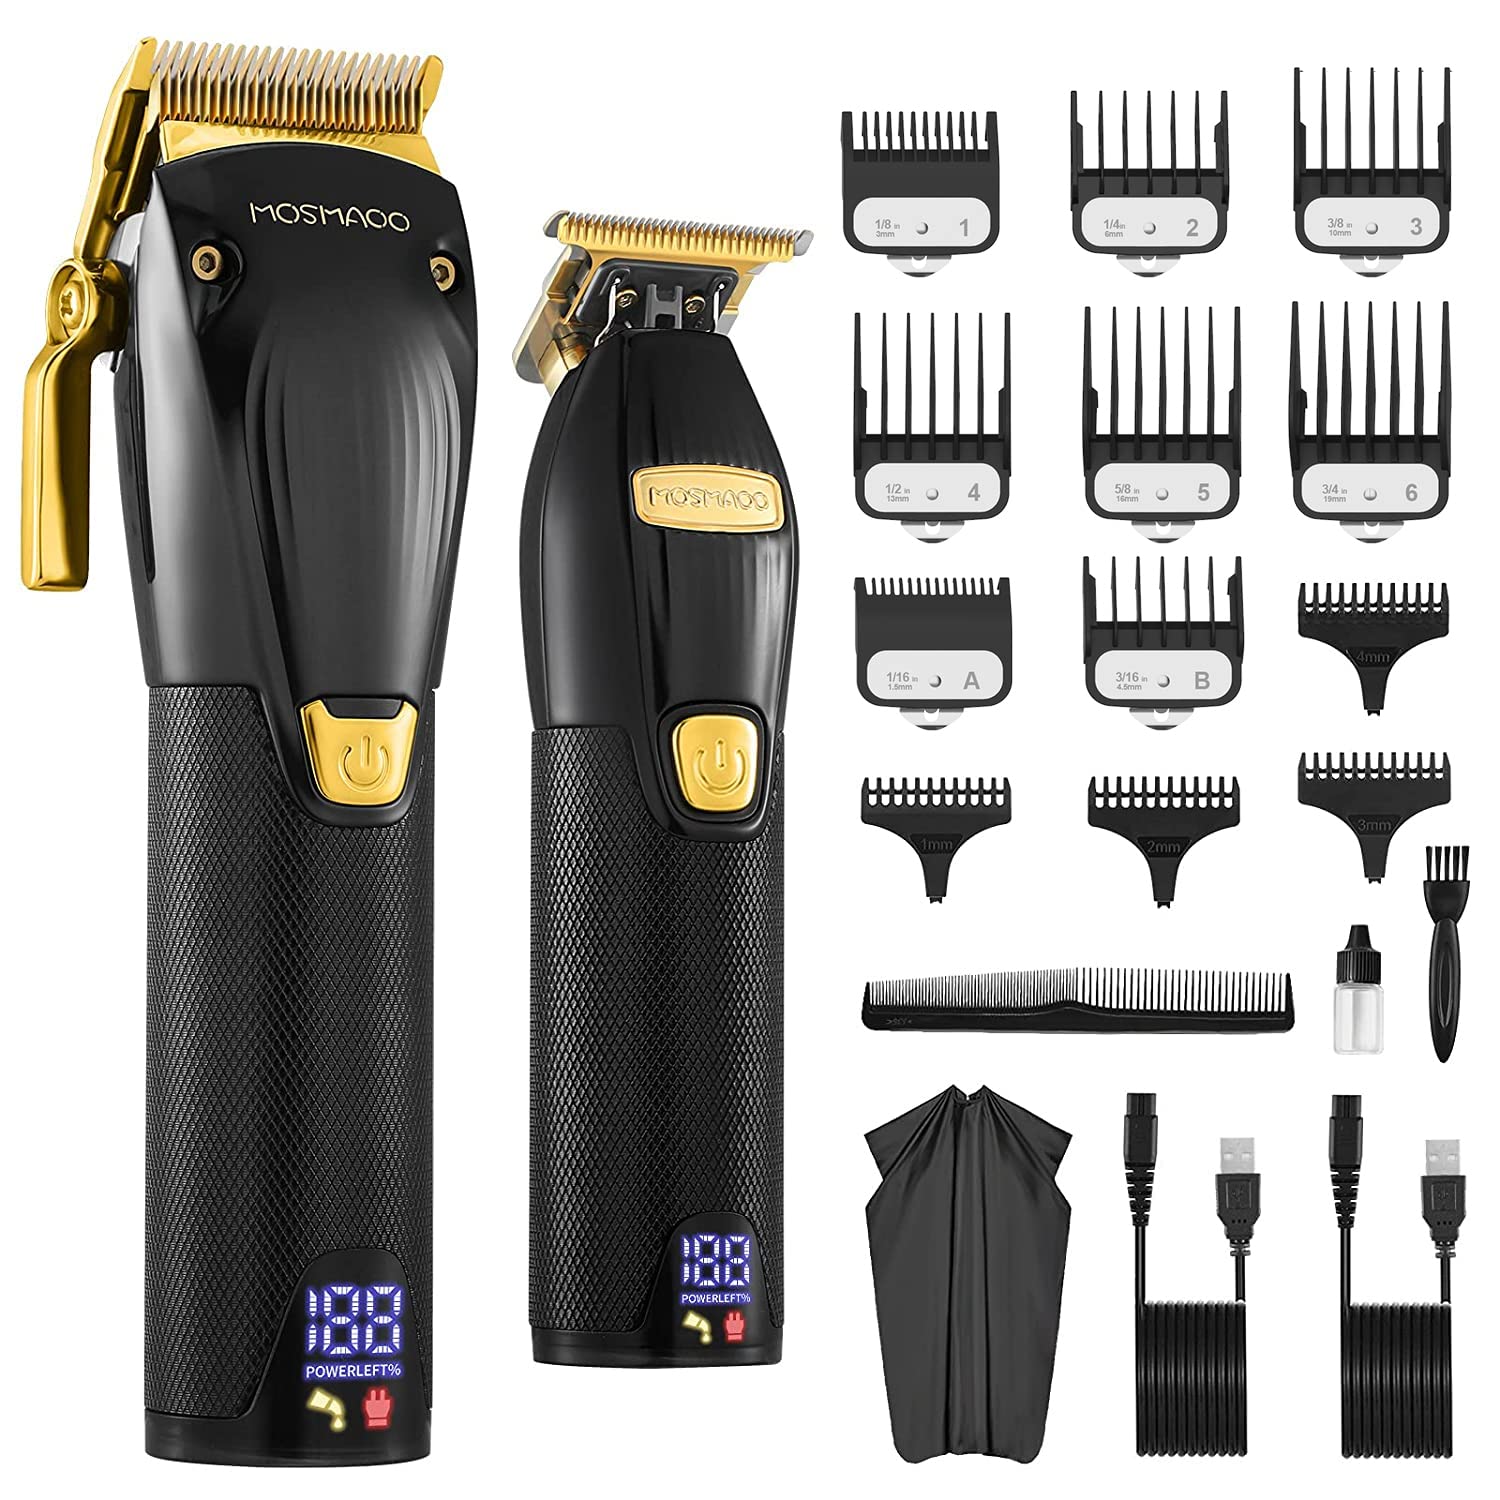 MOSMAOO Professional Cordless Hair Clippers and Hair Trimmer Combo Set for Barbers&Stylists, Clippers Hair Cutting